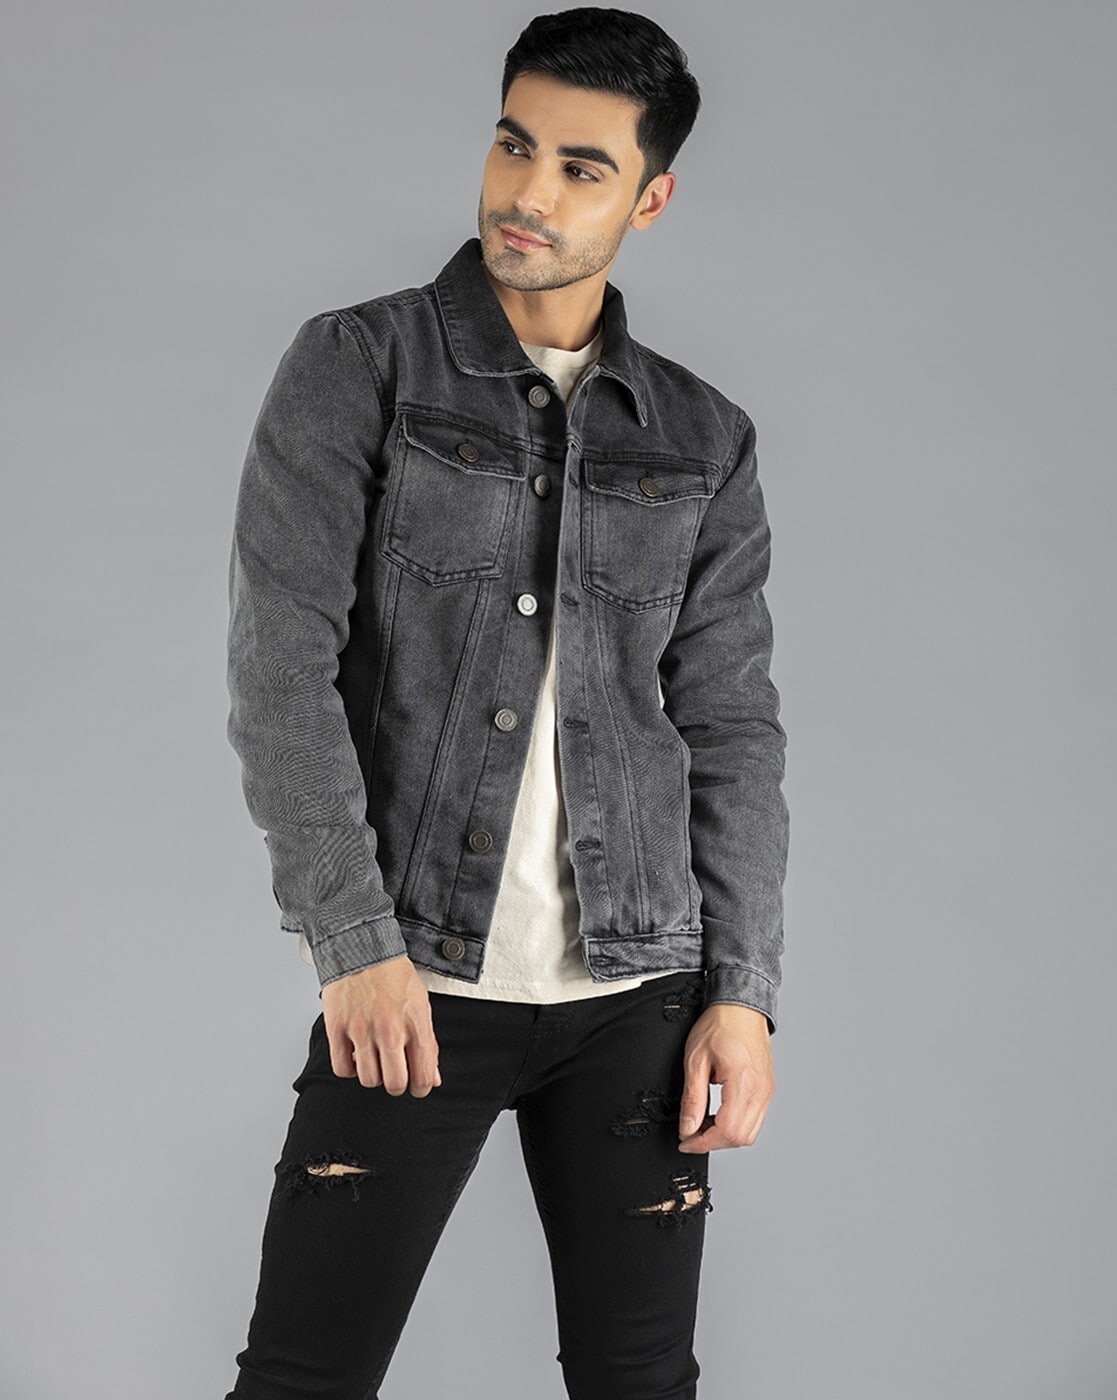 What To Wear With A Denim Jacket - Stylish Jean Jacket Outfit Ideas For Men  | Michael 84